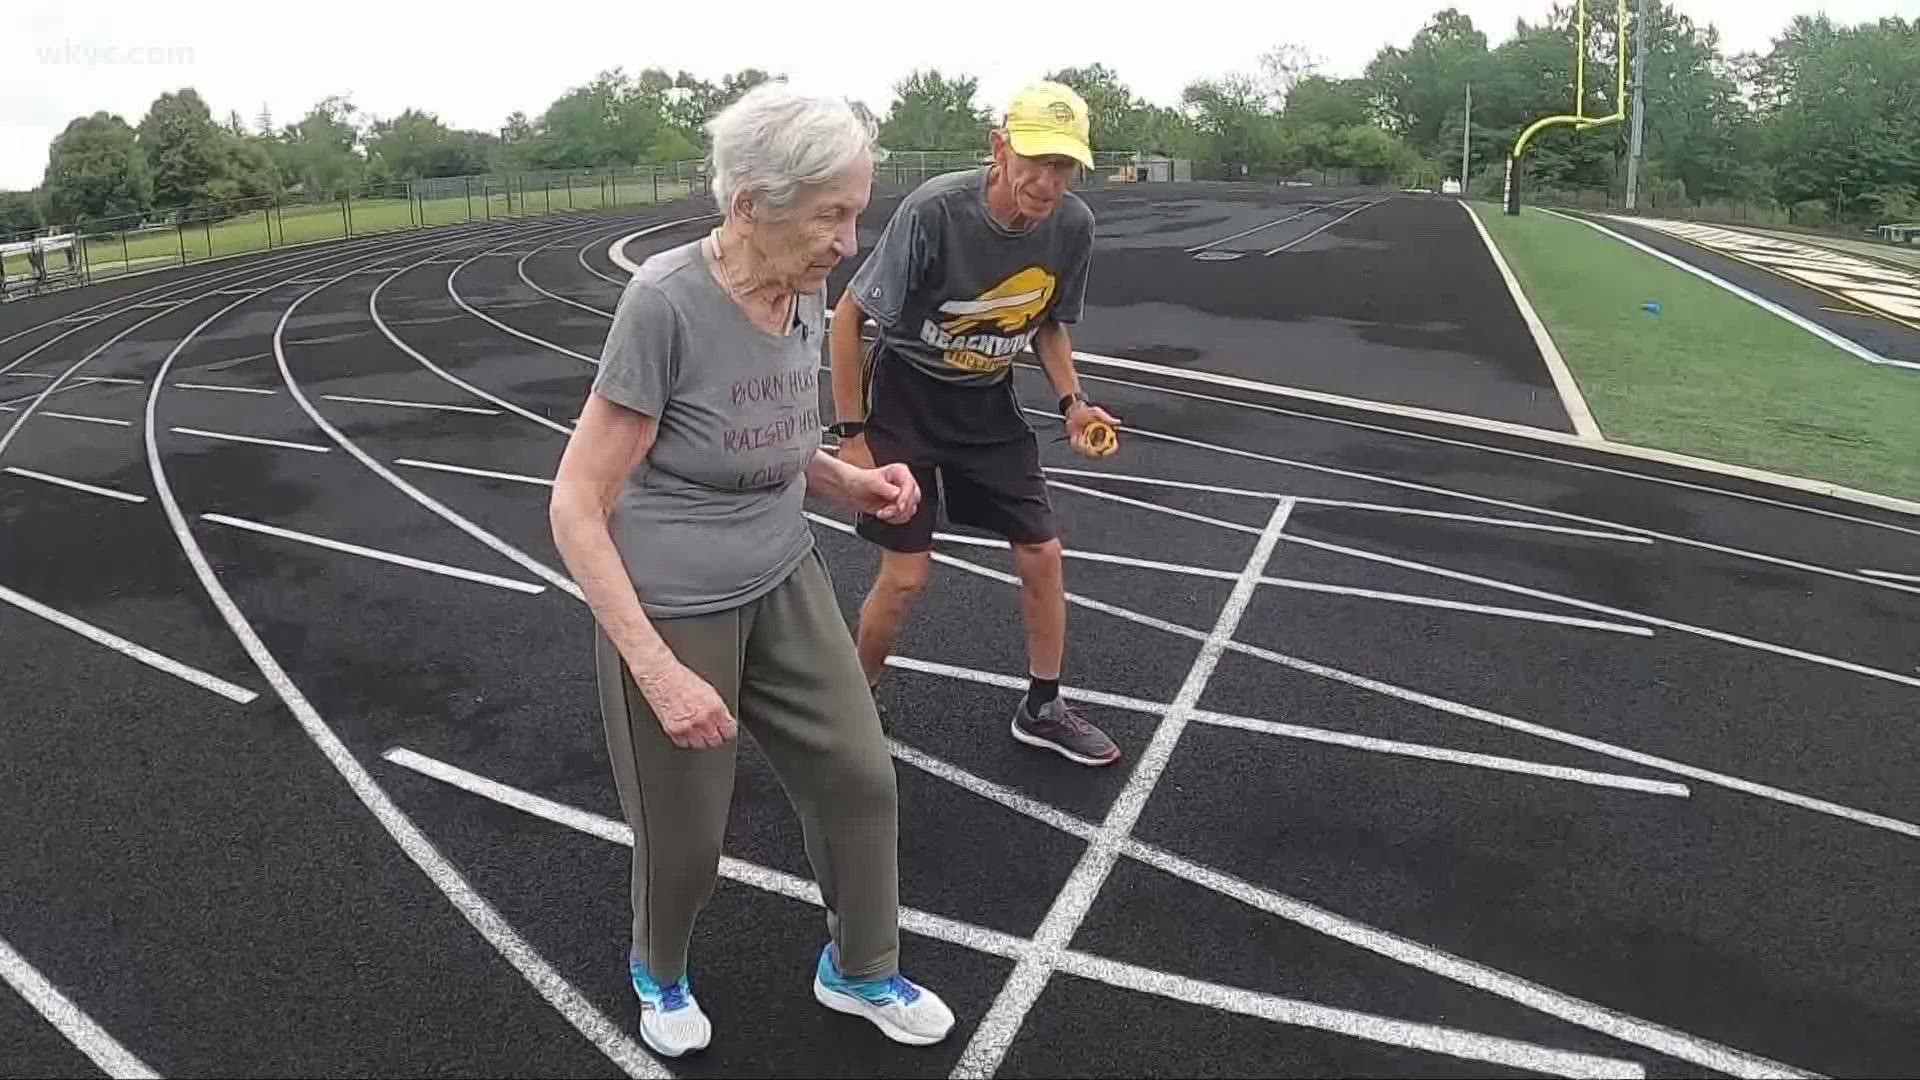 Lyndhurst resident Diane Friedman holds multiple world records in track and field, but she didn't discover her passion for running until much later in life.